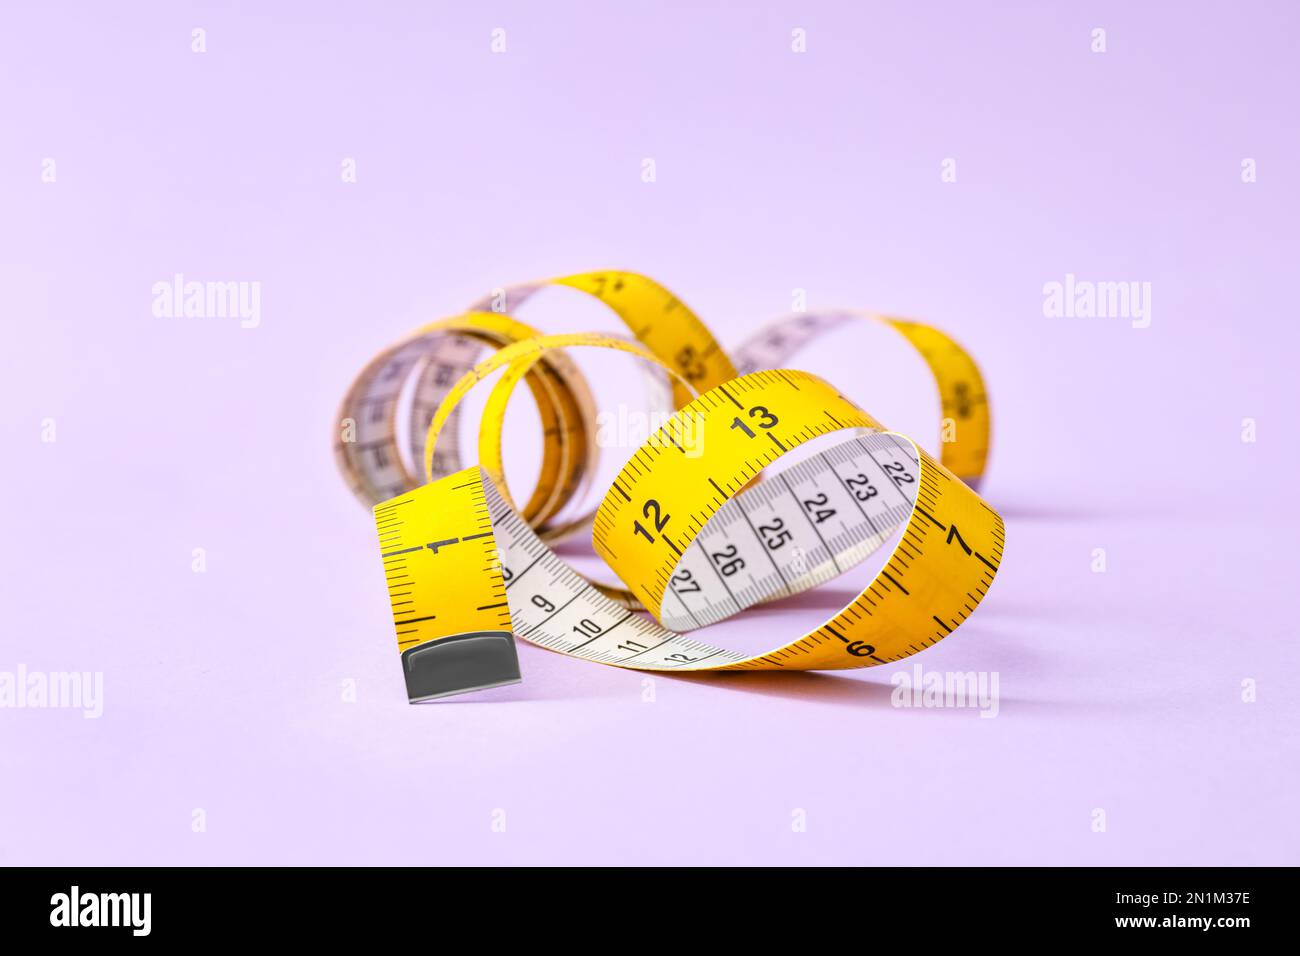 Female hands using wooden tailor ruler to measure cotton fabric. Textile  sale and sewing concept Stock Photo - Alamy